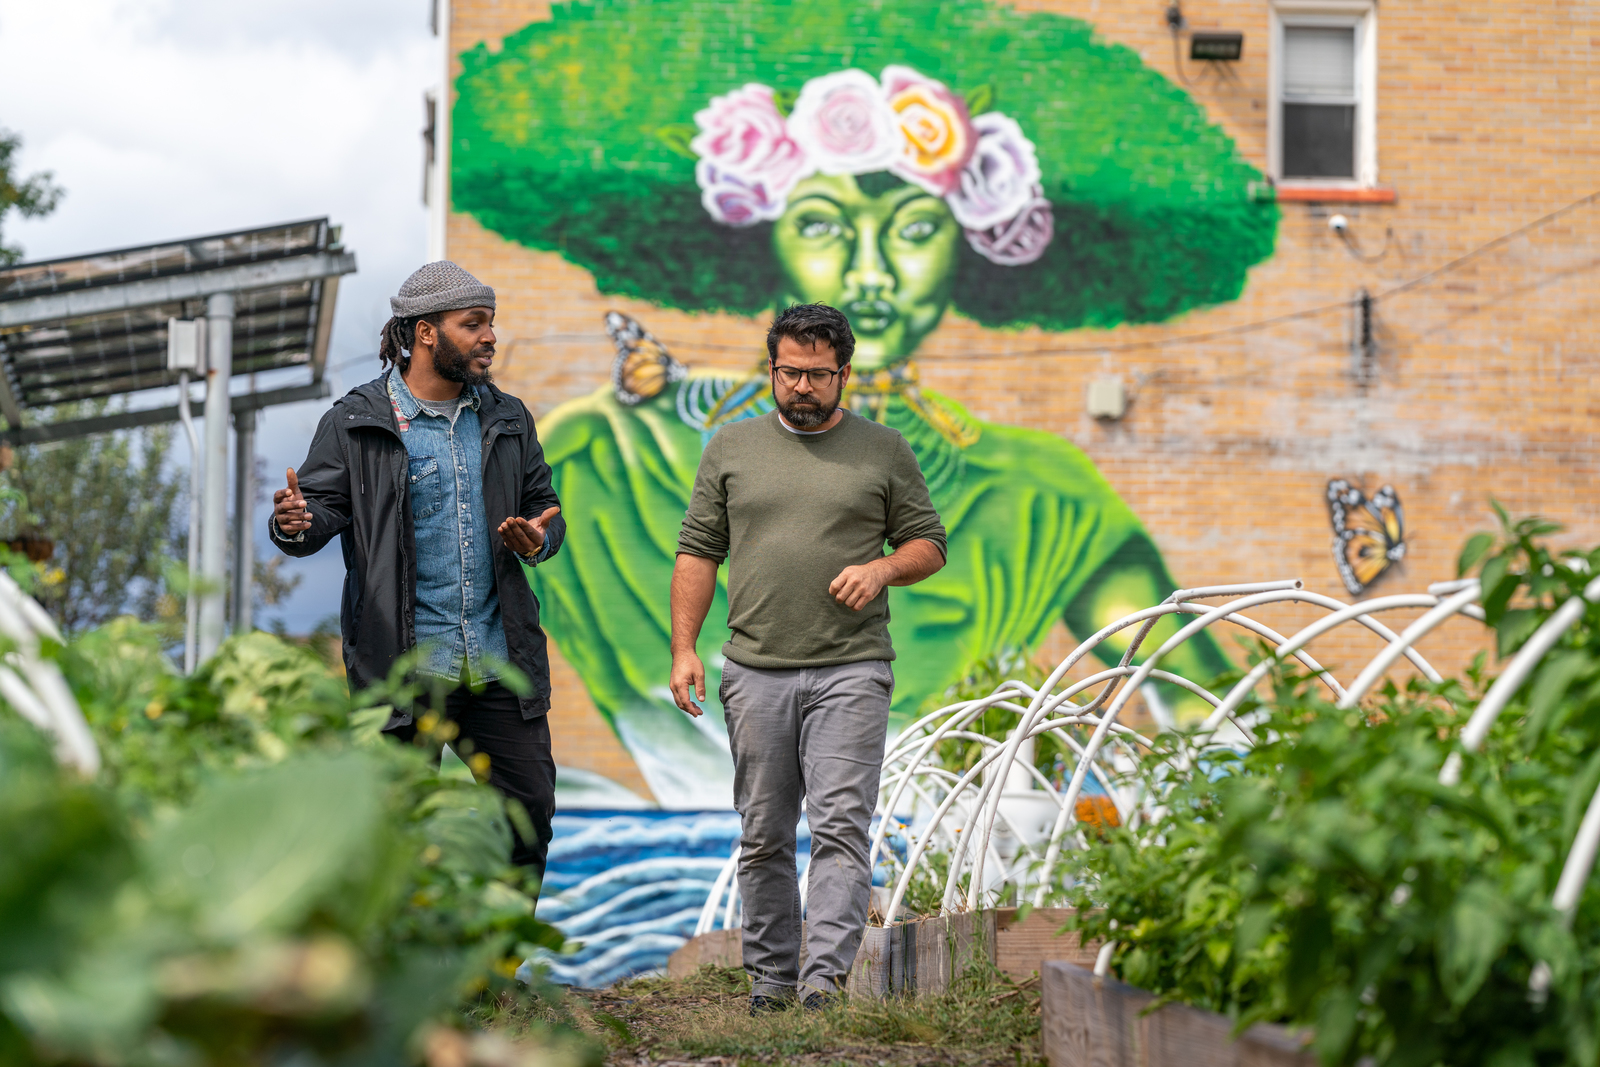 Photo of two men walking through a city garden, with a large colorful mural on the brick wall behind them